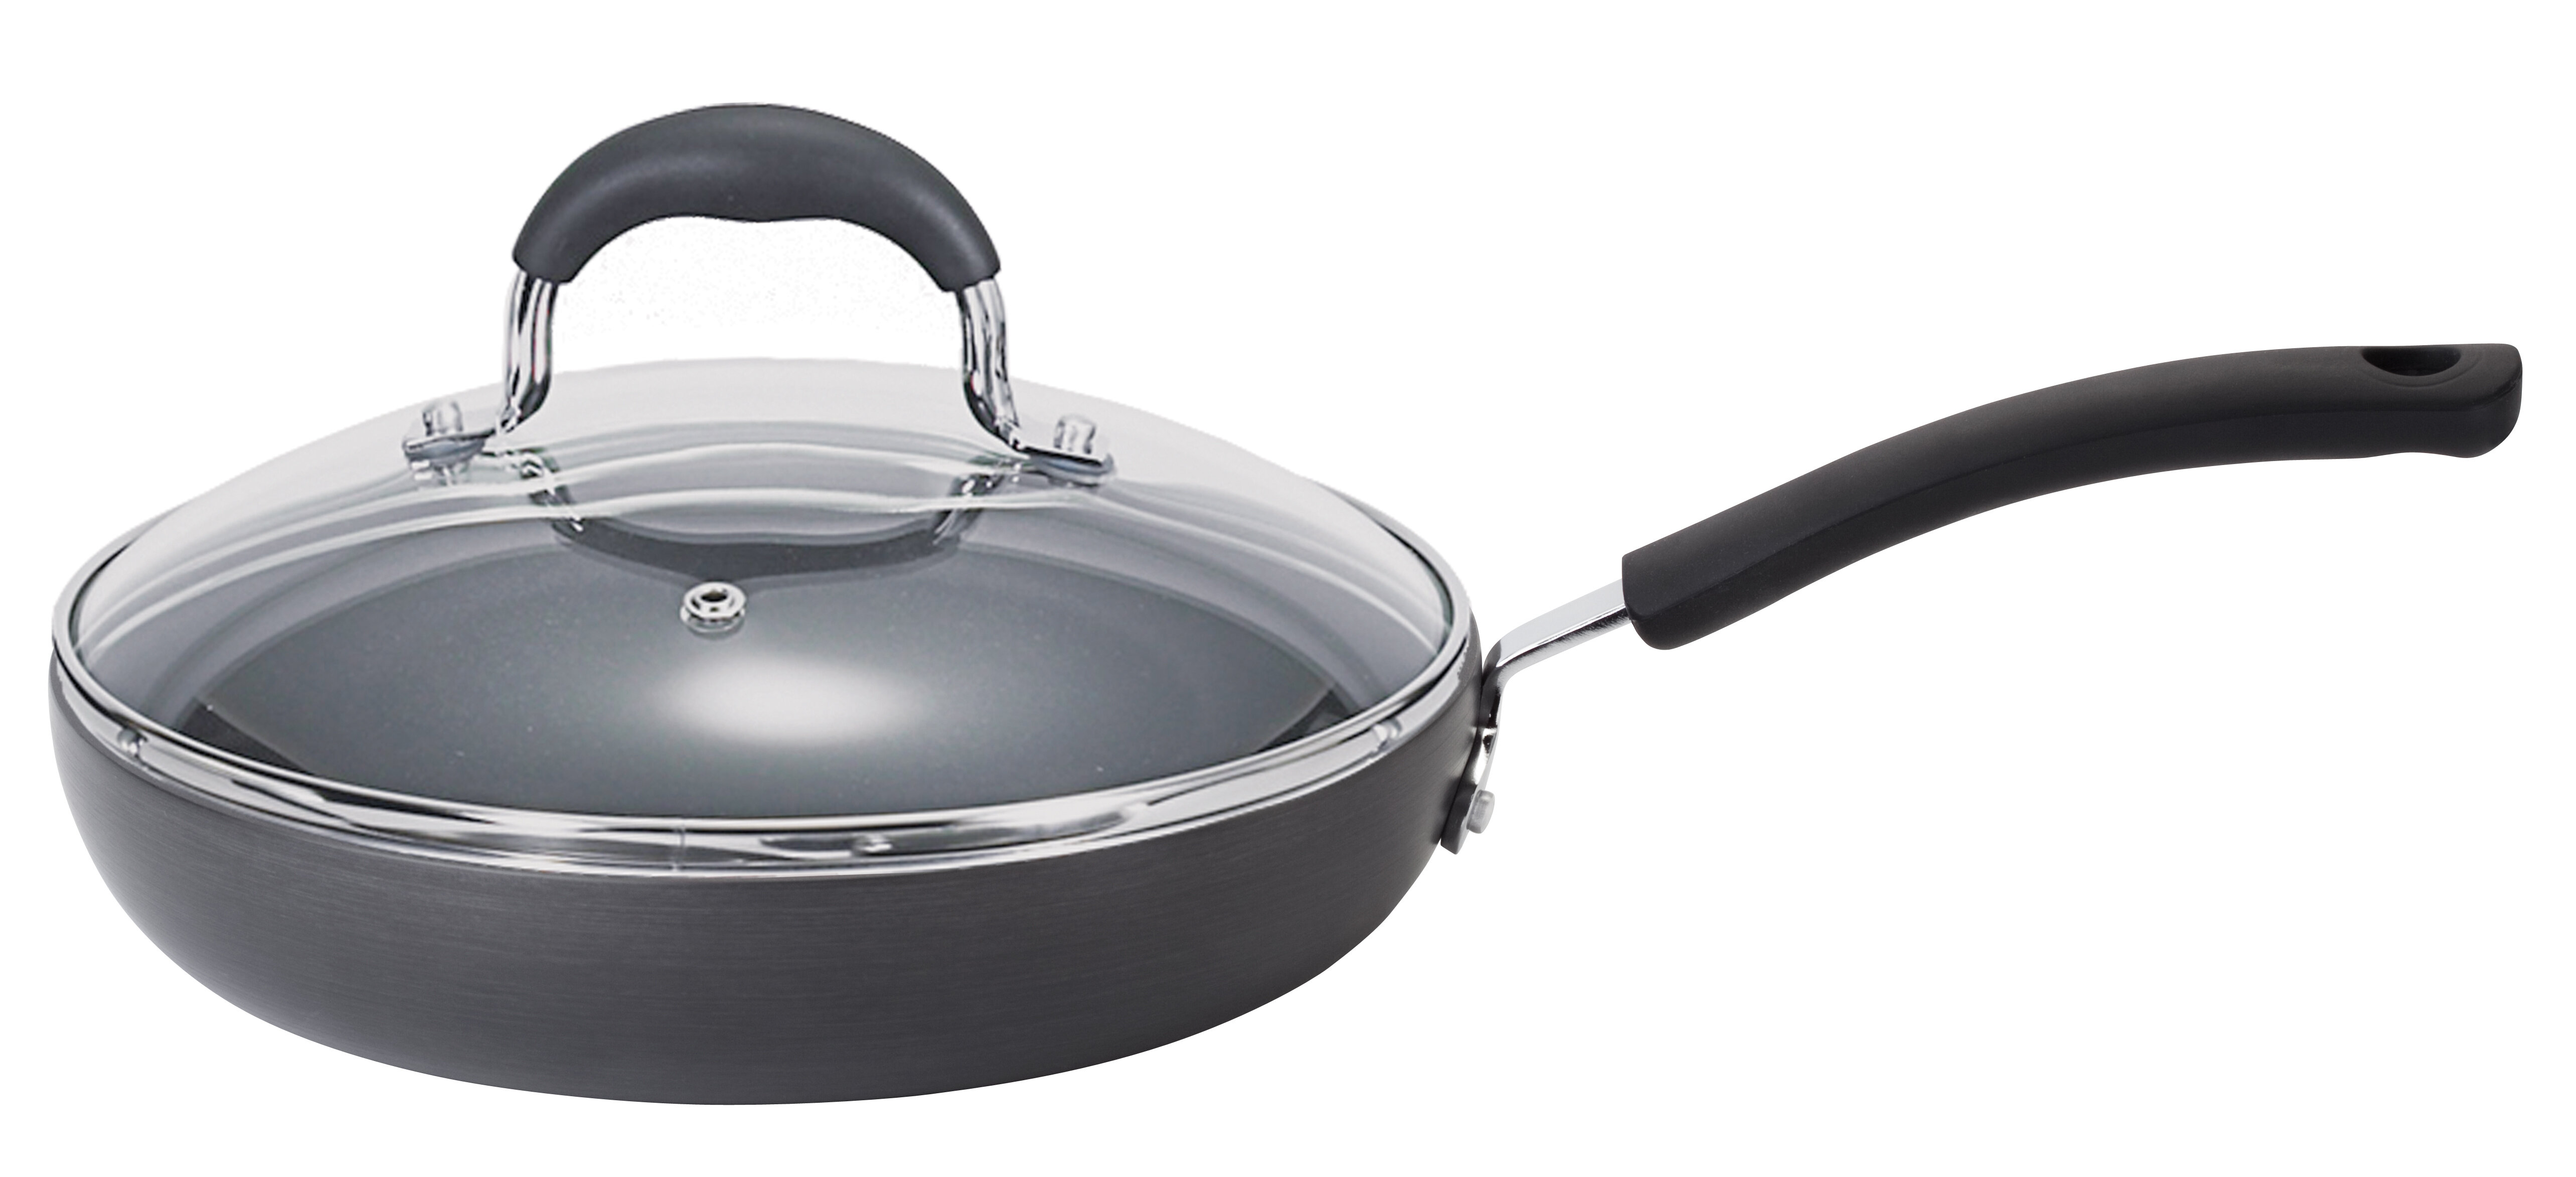 T-fal t-fal, ultimate hard anodized, nonstick 16 in. x 13 in. roaster with  rack, black, , 16 inch x 13 inch, grey